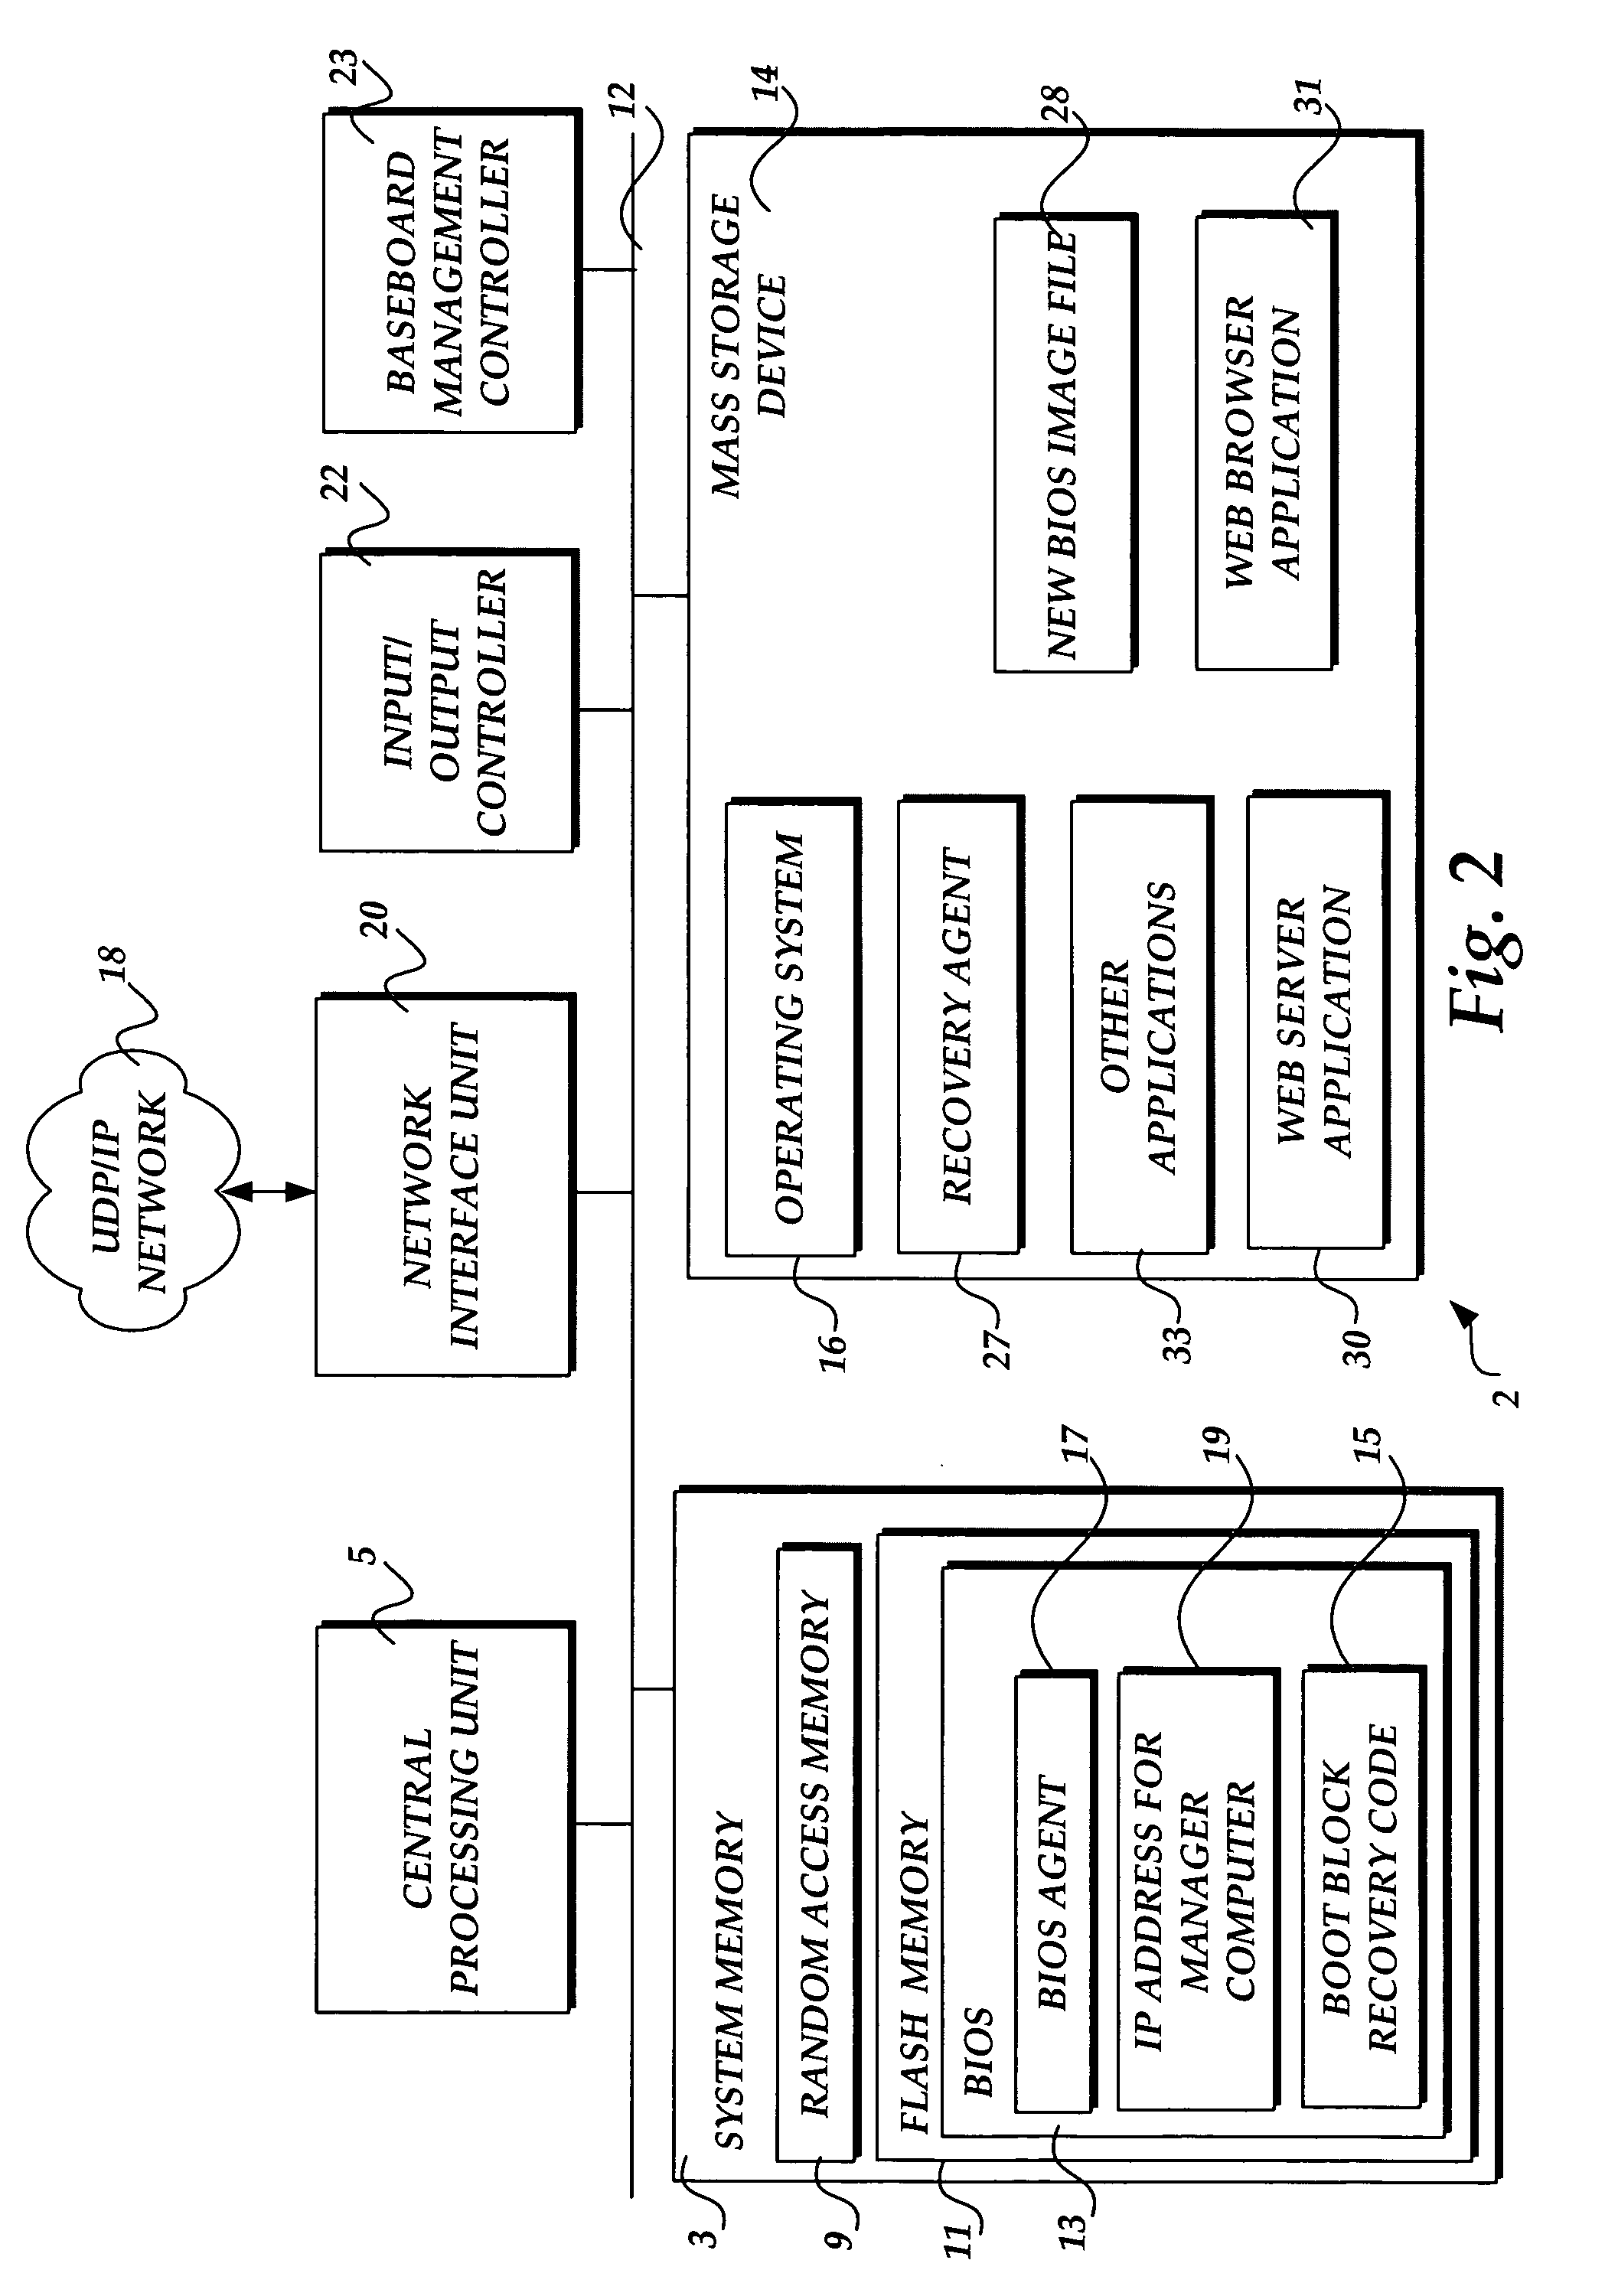 Methods and systems for updating and recovering firmware within a computing device over a distributed network